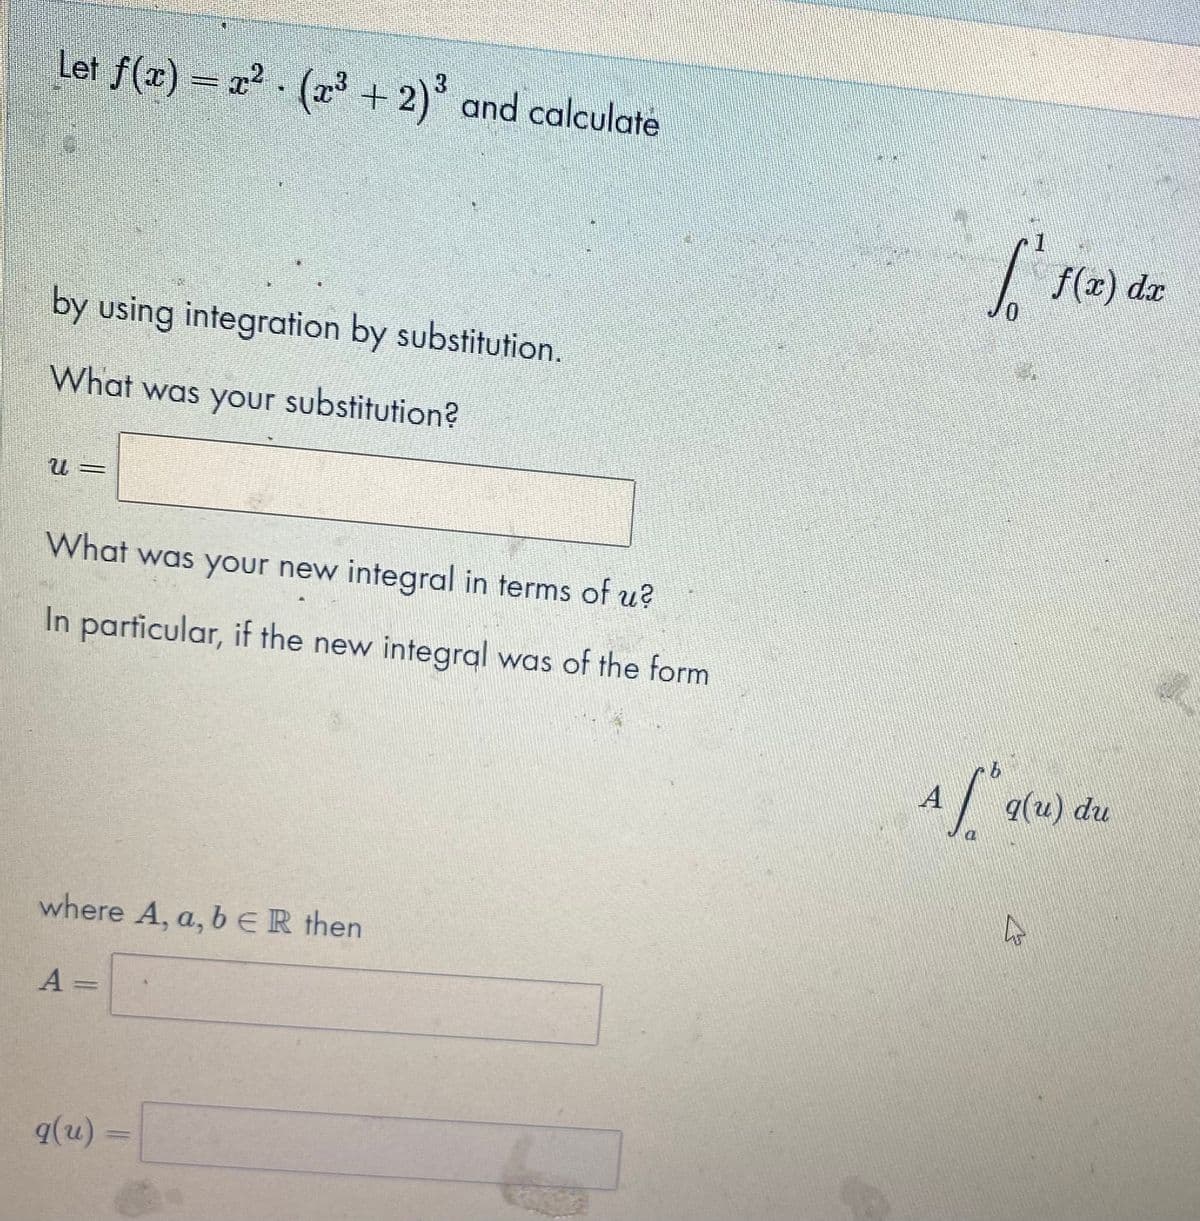 Let f(x) = r² · (23 + 2)° and calculate
f(x) dr
by using integration by substitution.
What was your substitution?
What was your new integral in terms of u?
In particular, if the new integral was of the form
A
q(u) du
where A, a, b ER then
A
q(u) =
